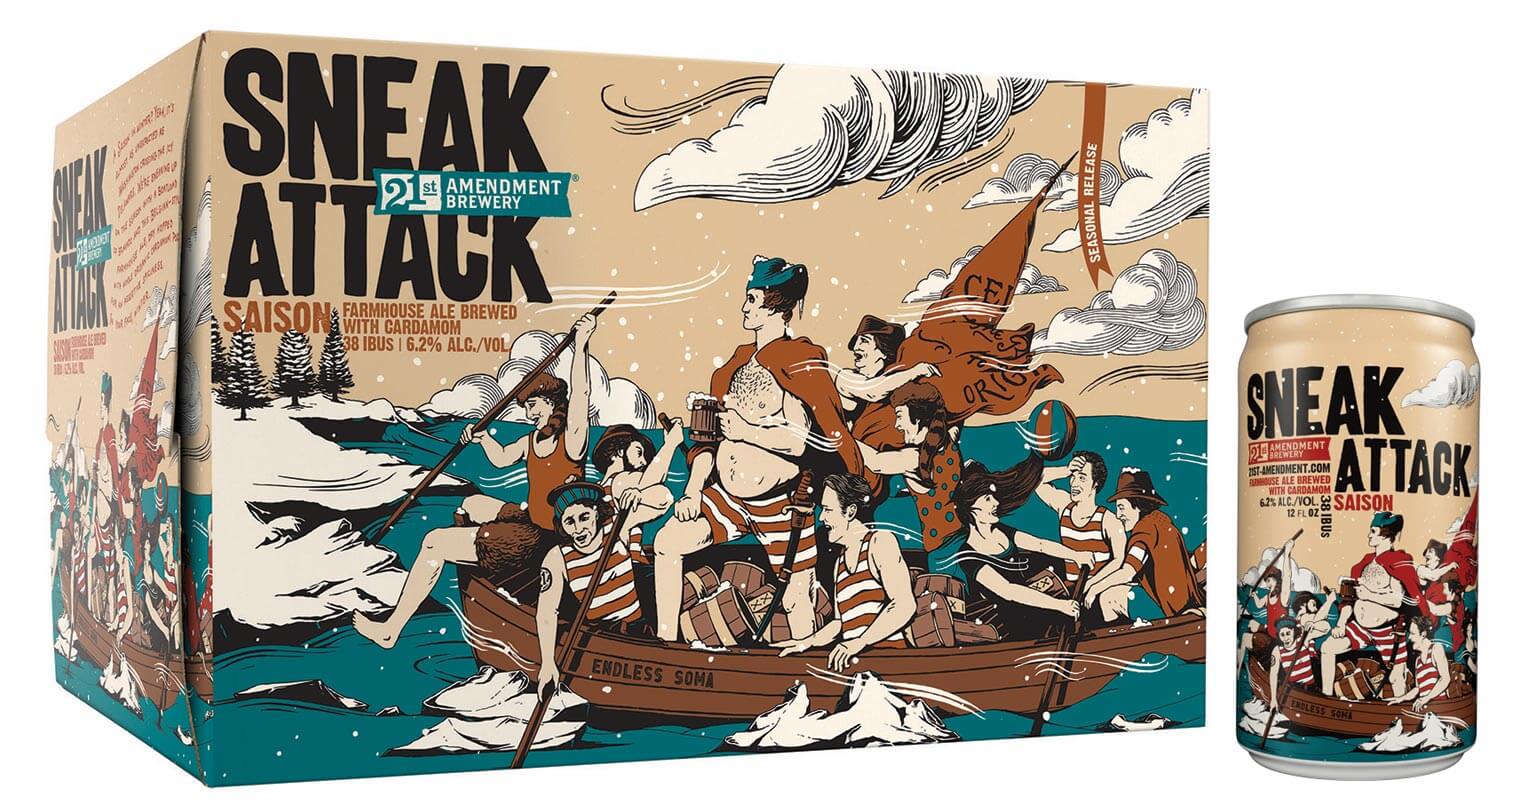 21st Amendment Brewery Releases Sneak Attack Saison, featured image